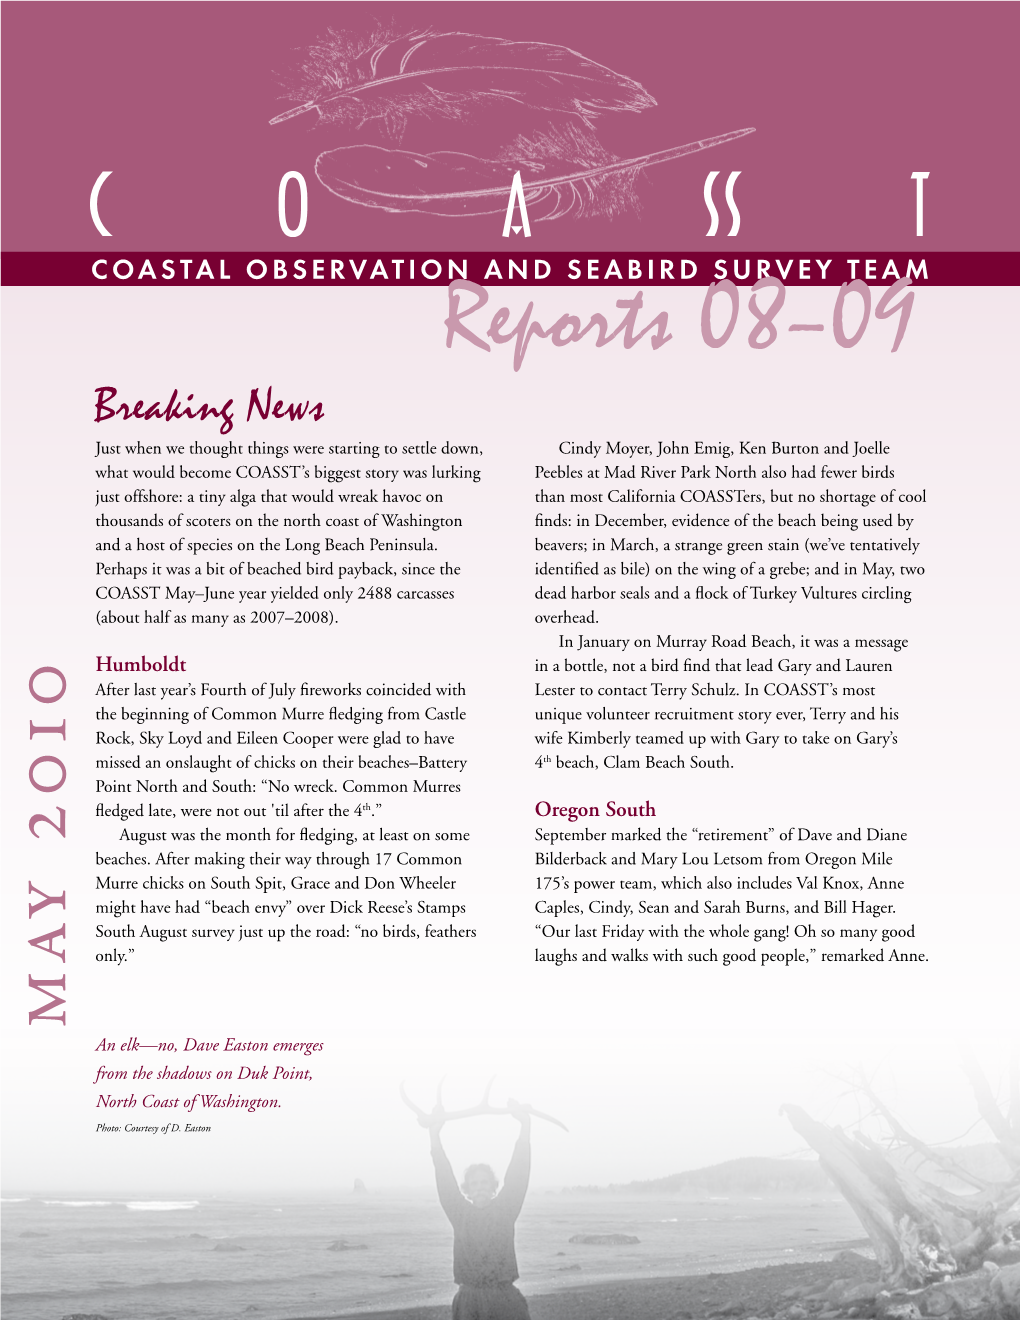 Reports 08–09